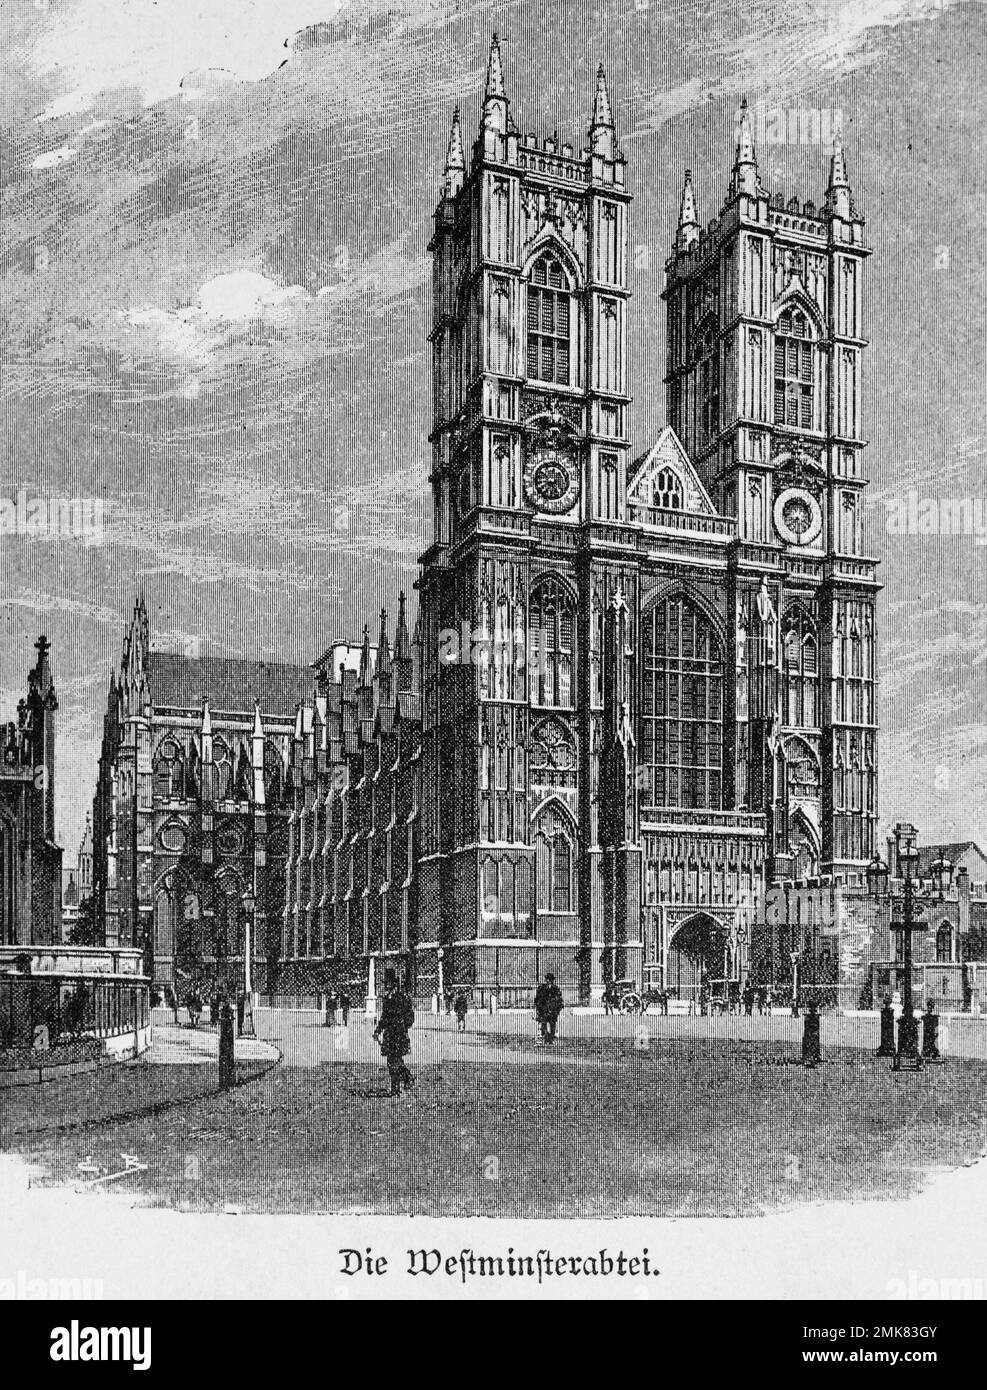 Westminster Abbey, London, historical illustration, wood engraving, 19th century Stock Photo